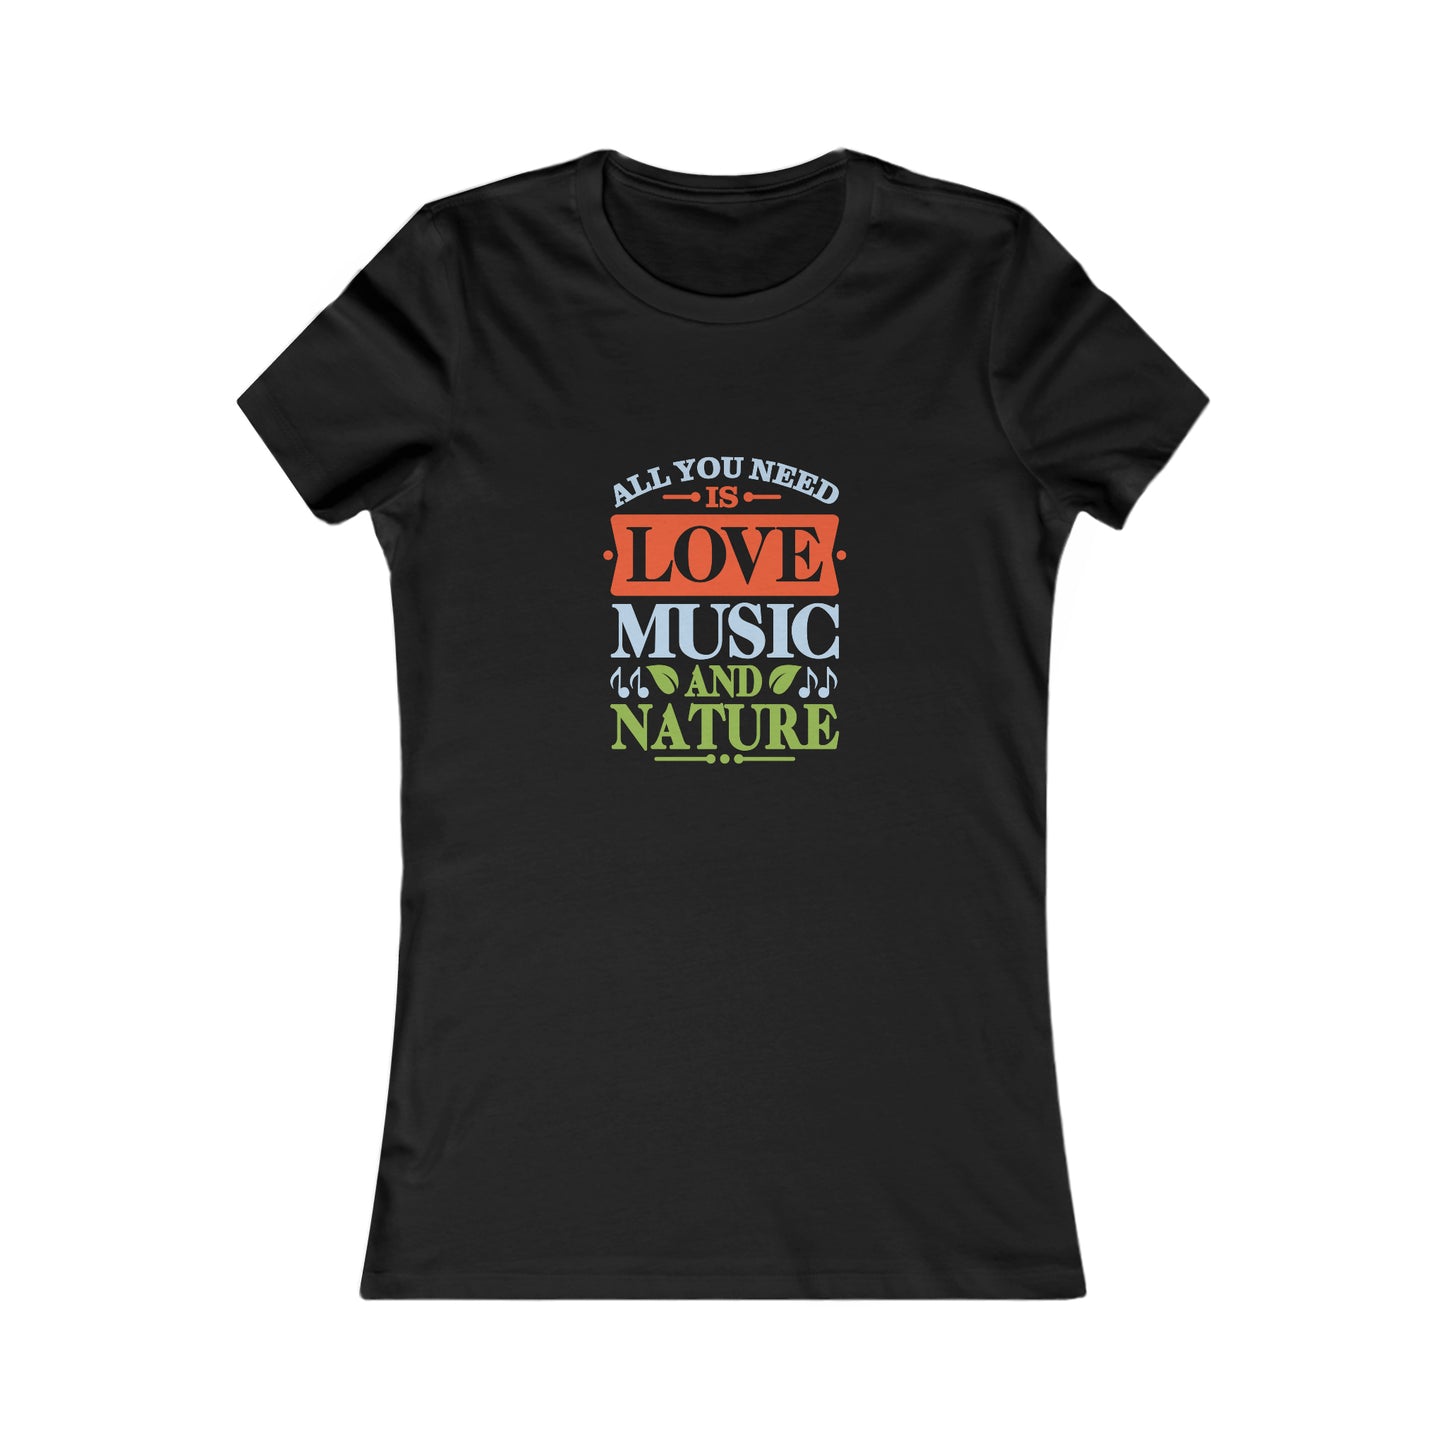 All You Need is Love, Music & Nature Women's Tee